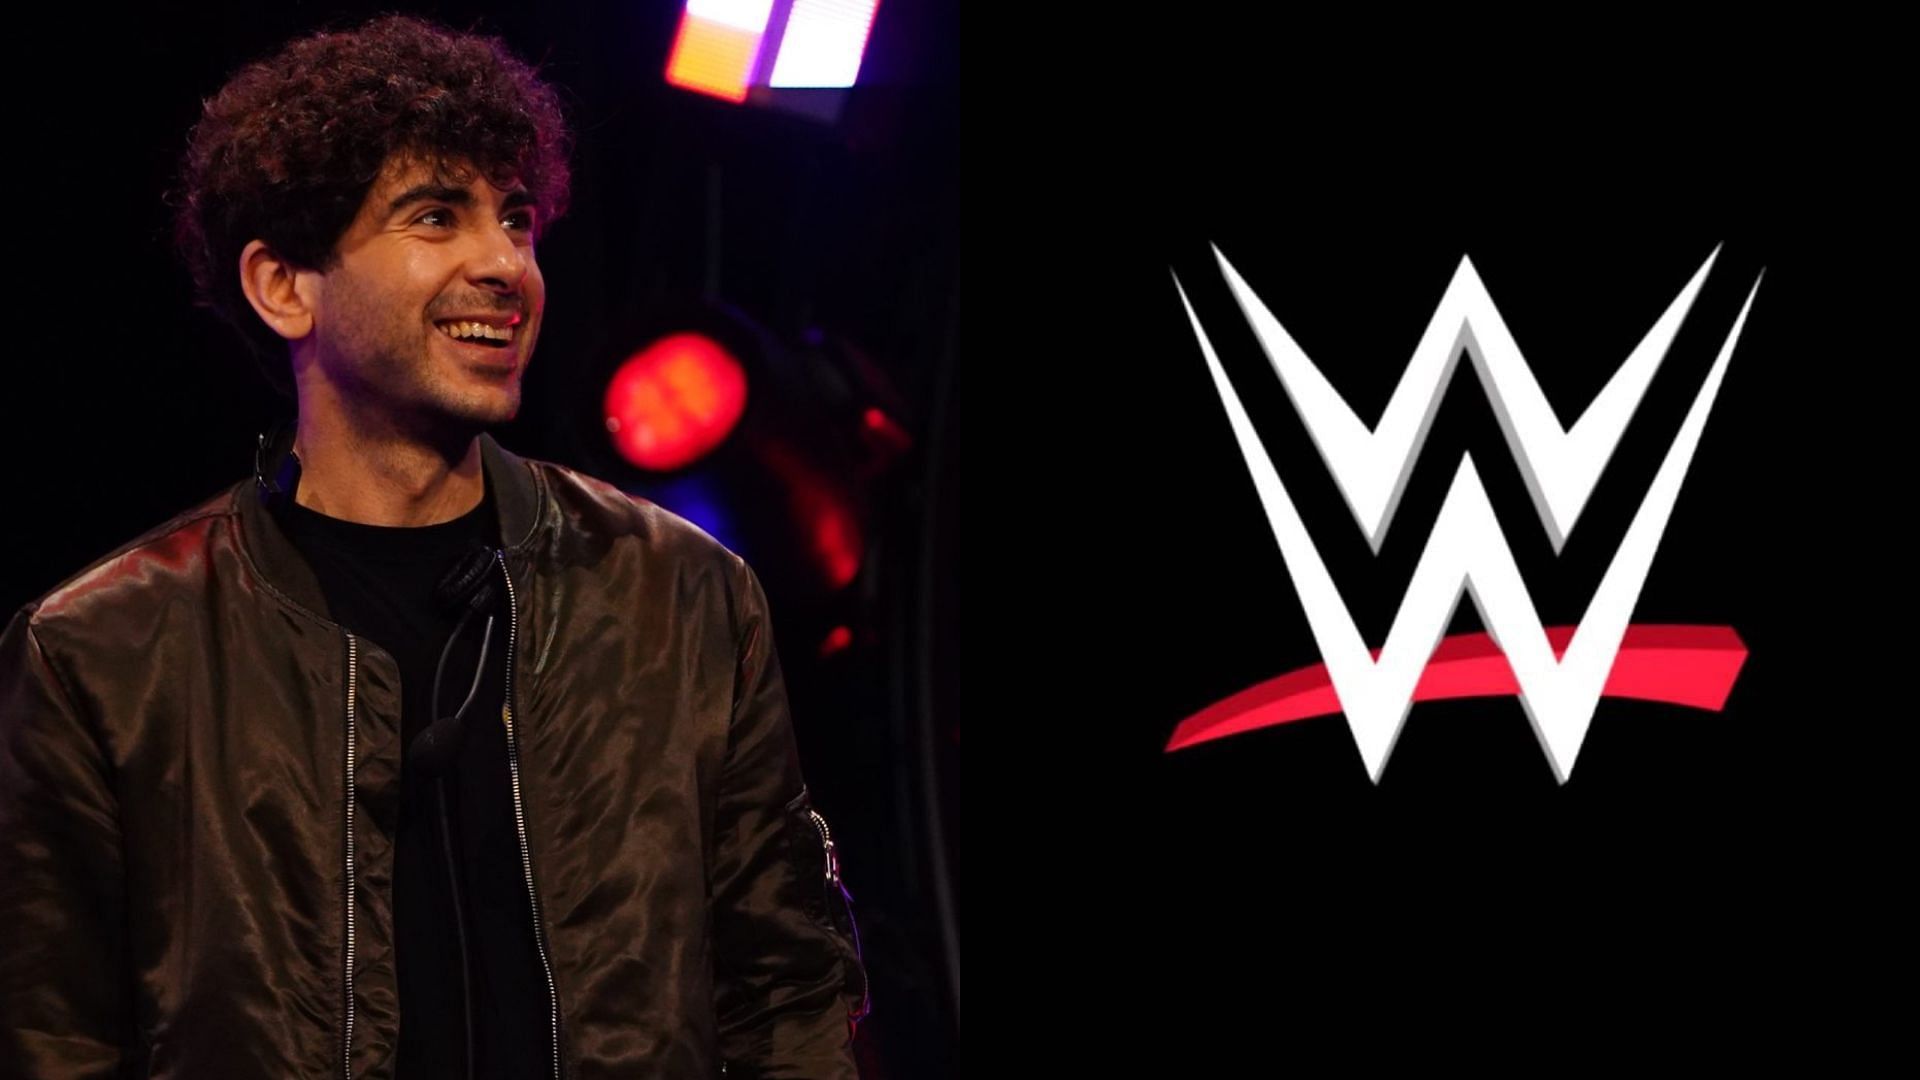 Tony Khan is owner of AEW and ROH